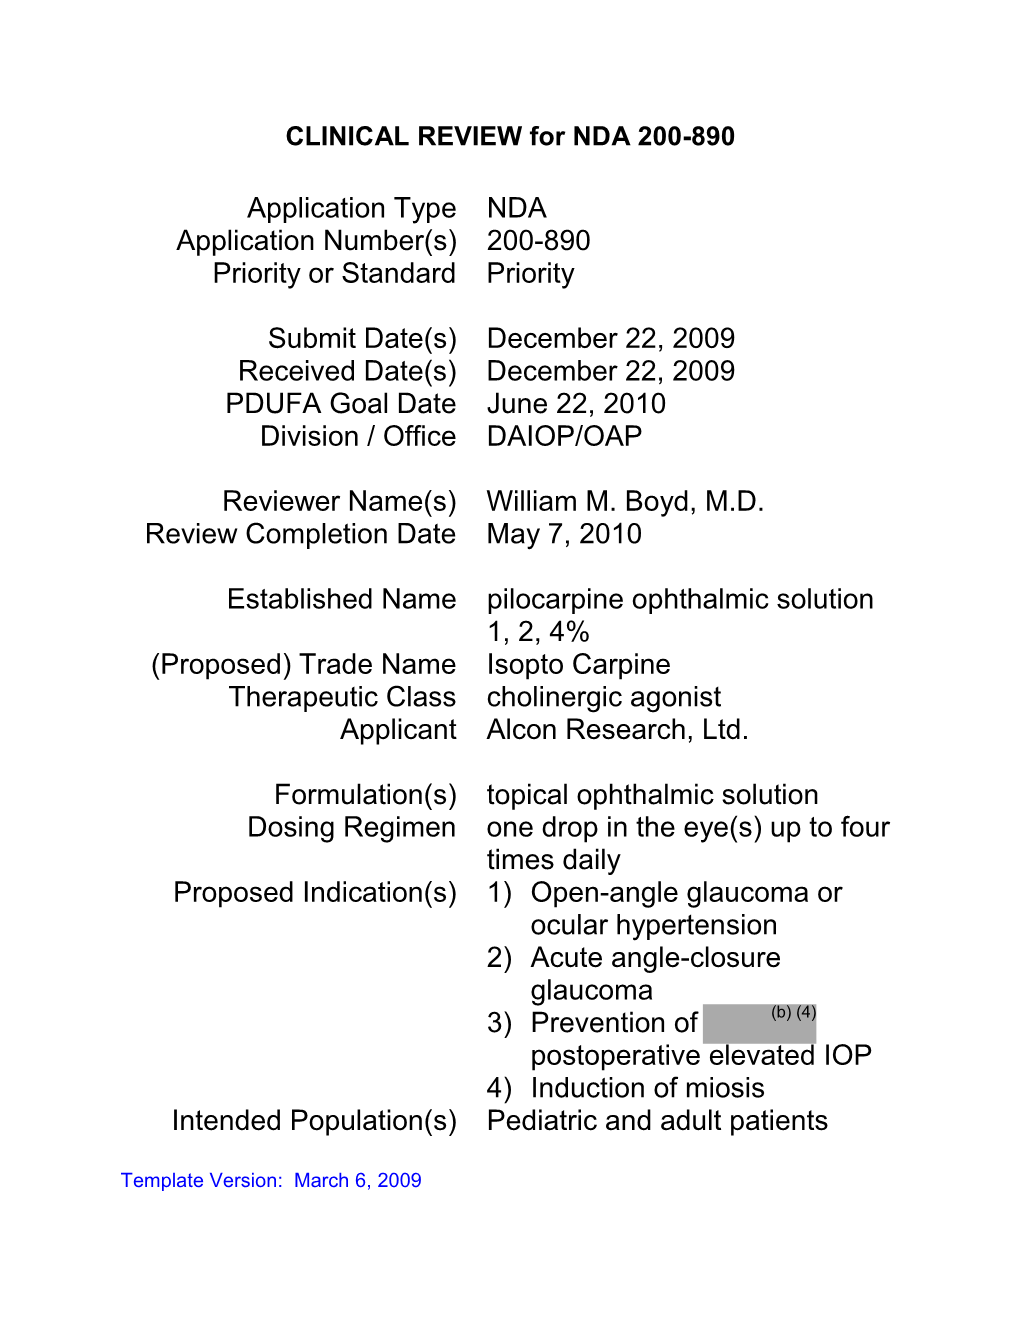 CLINICAL REVIEW for NDA 200-890